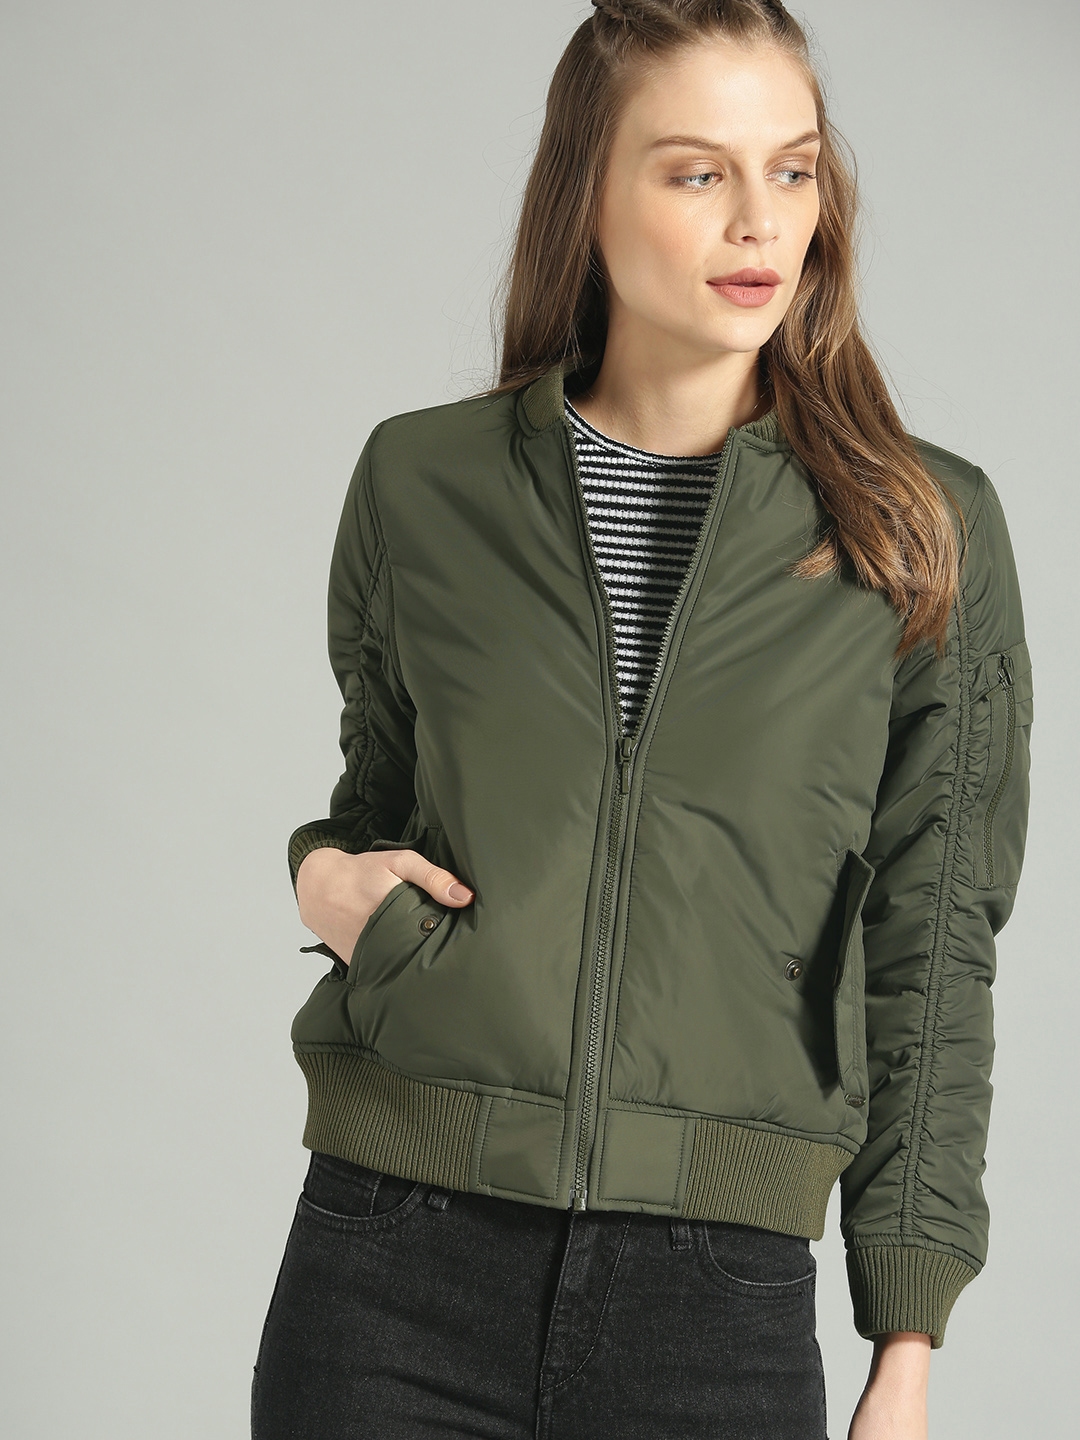 11 Types Of Jackets For Women To Wear All Year Along-anthinhphatland.vn